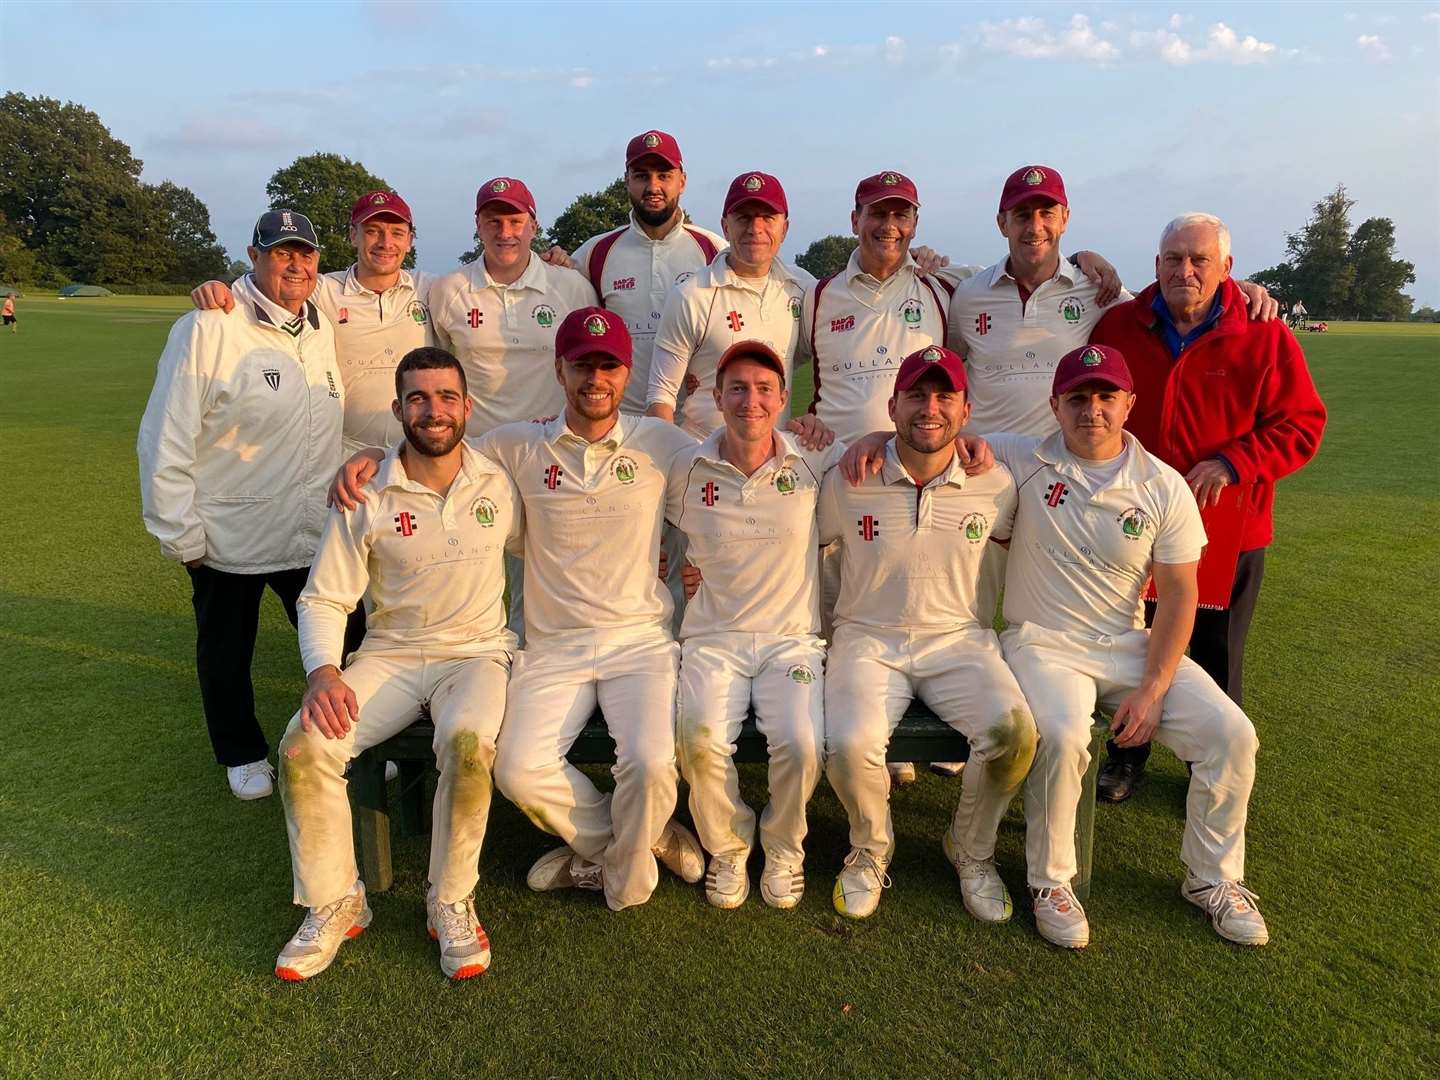 Bearsted are Kent County Village League Division 1 champions